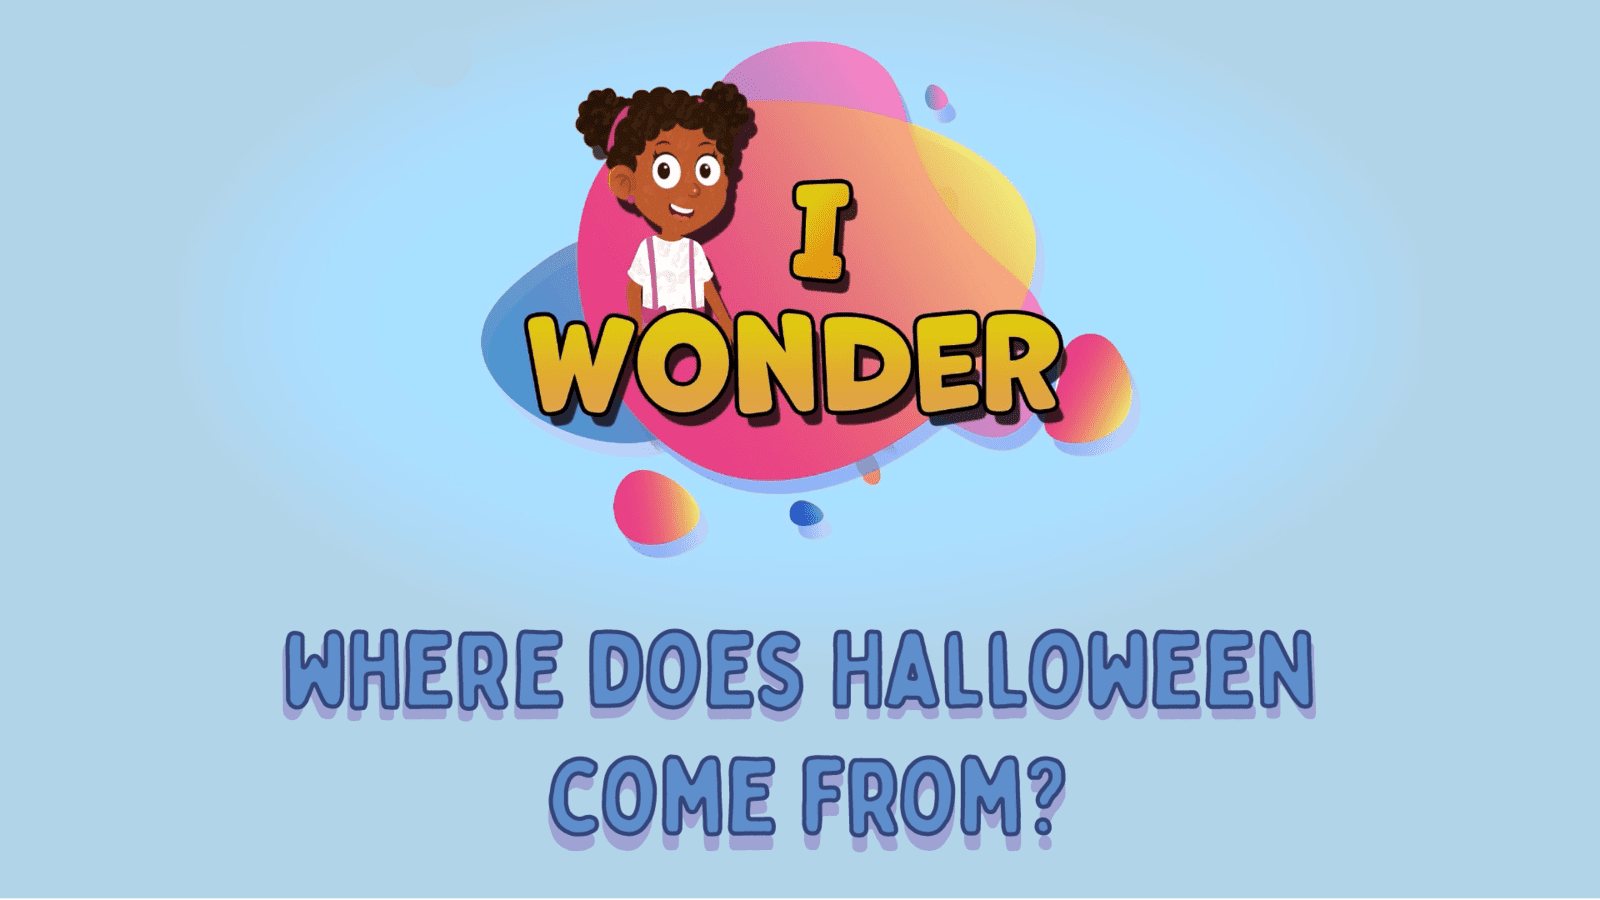 Where Does Halloween Come From?